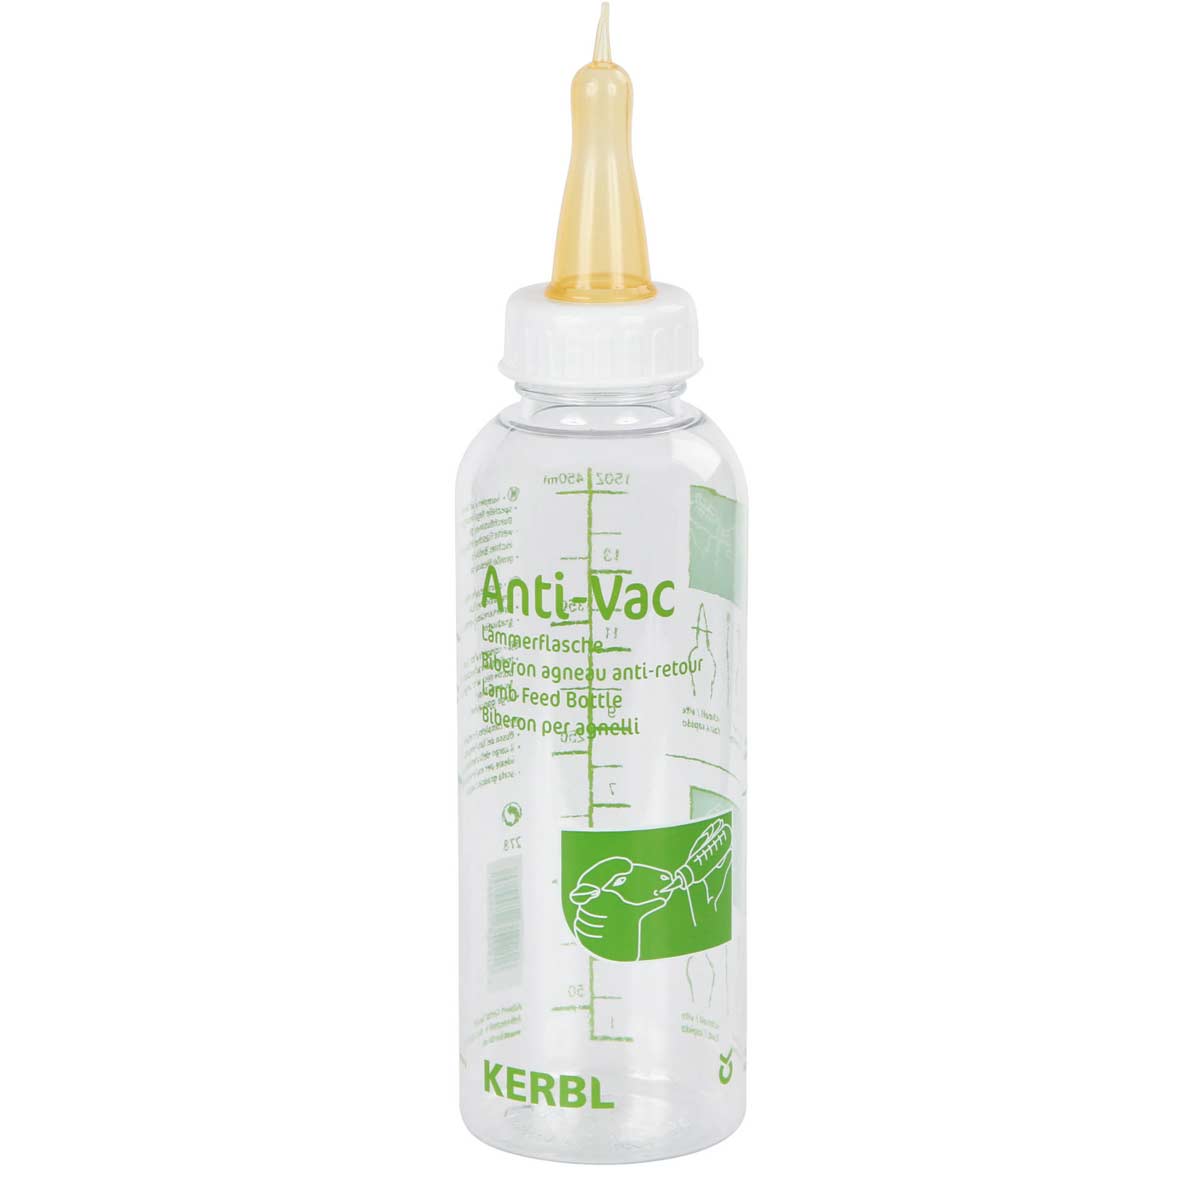 Lamb feed bottle Anti-Vac complete with teat